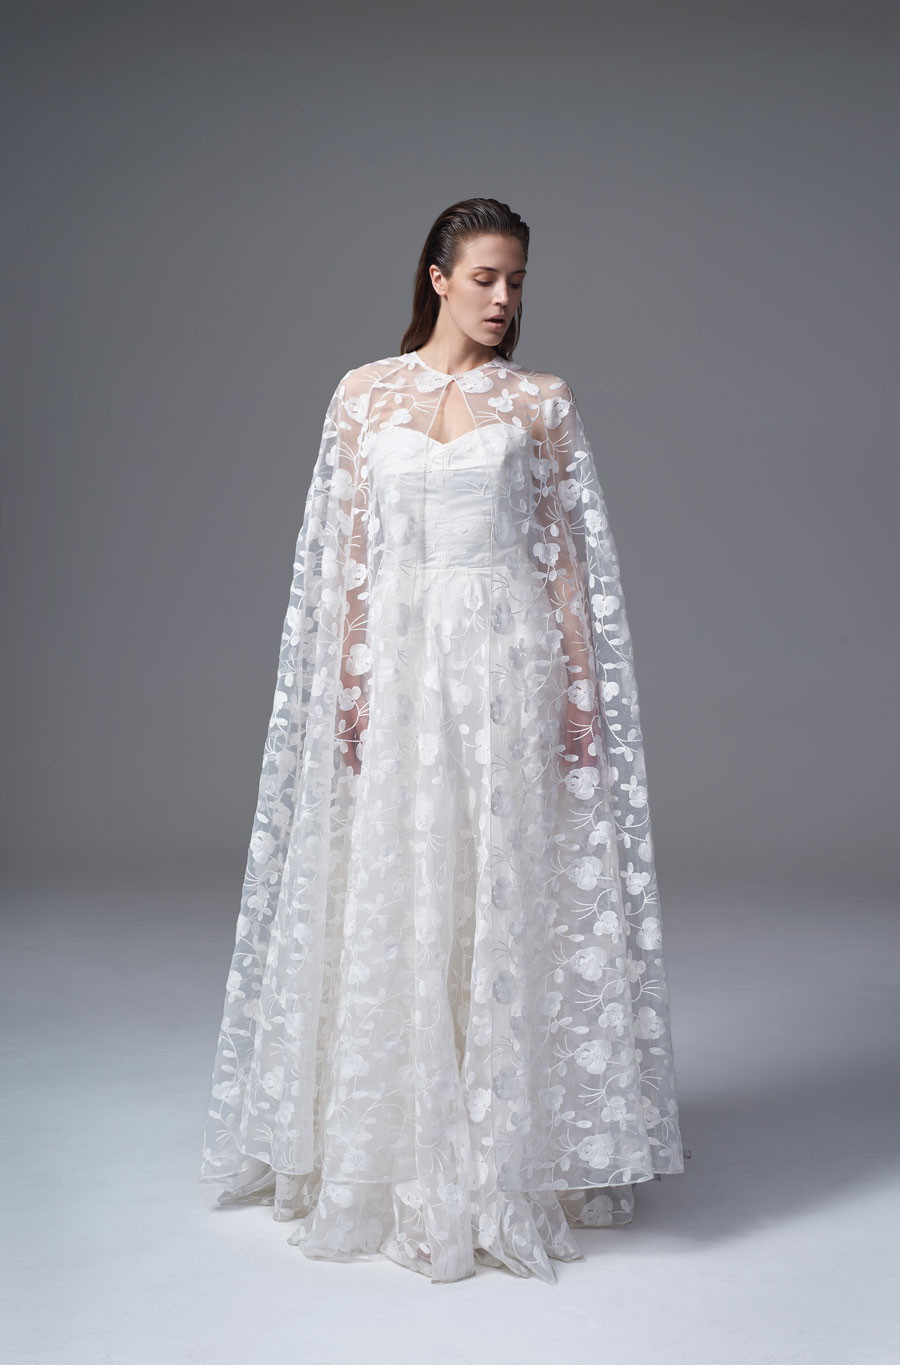 Wedding Dresses 2017! The 'Wild Love' Collection by Halfpenny London